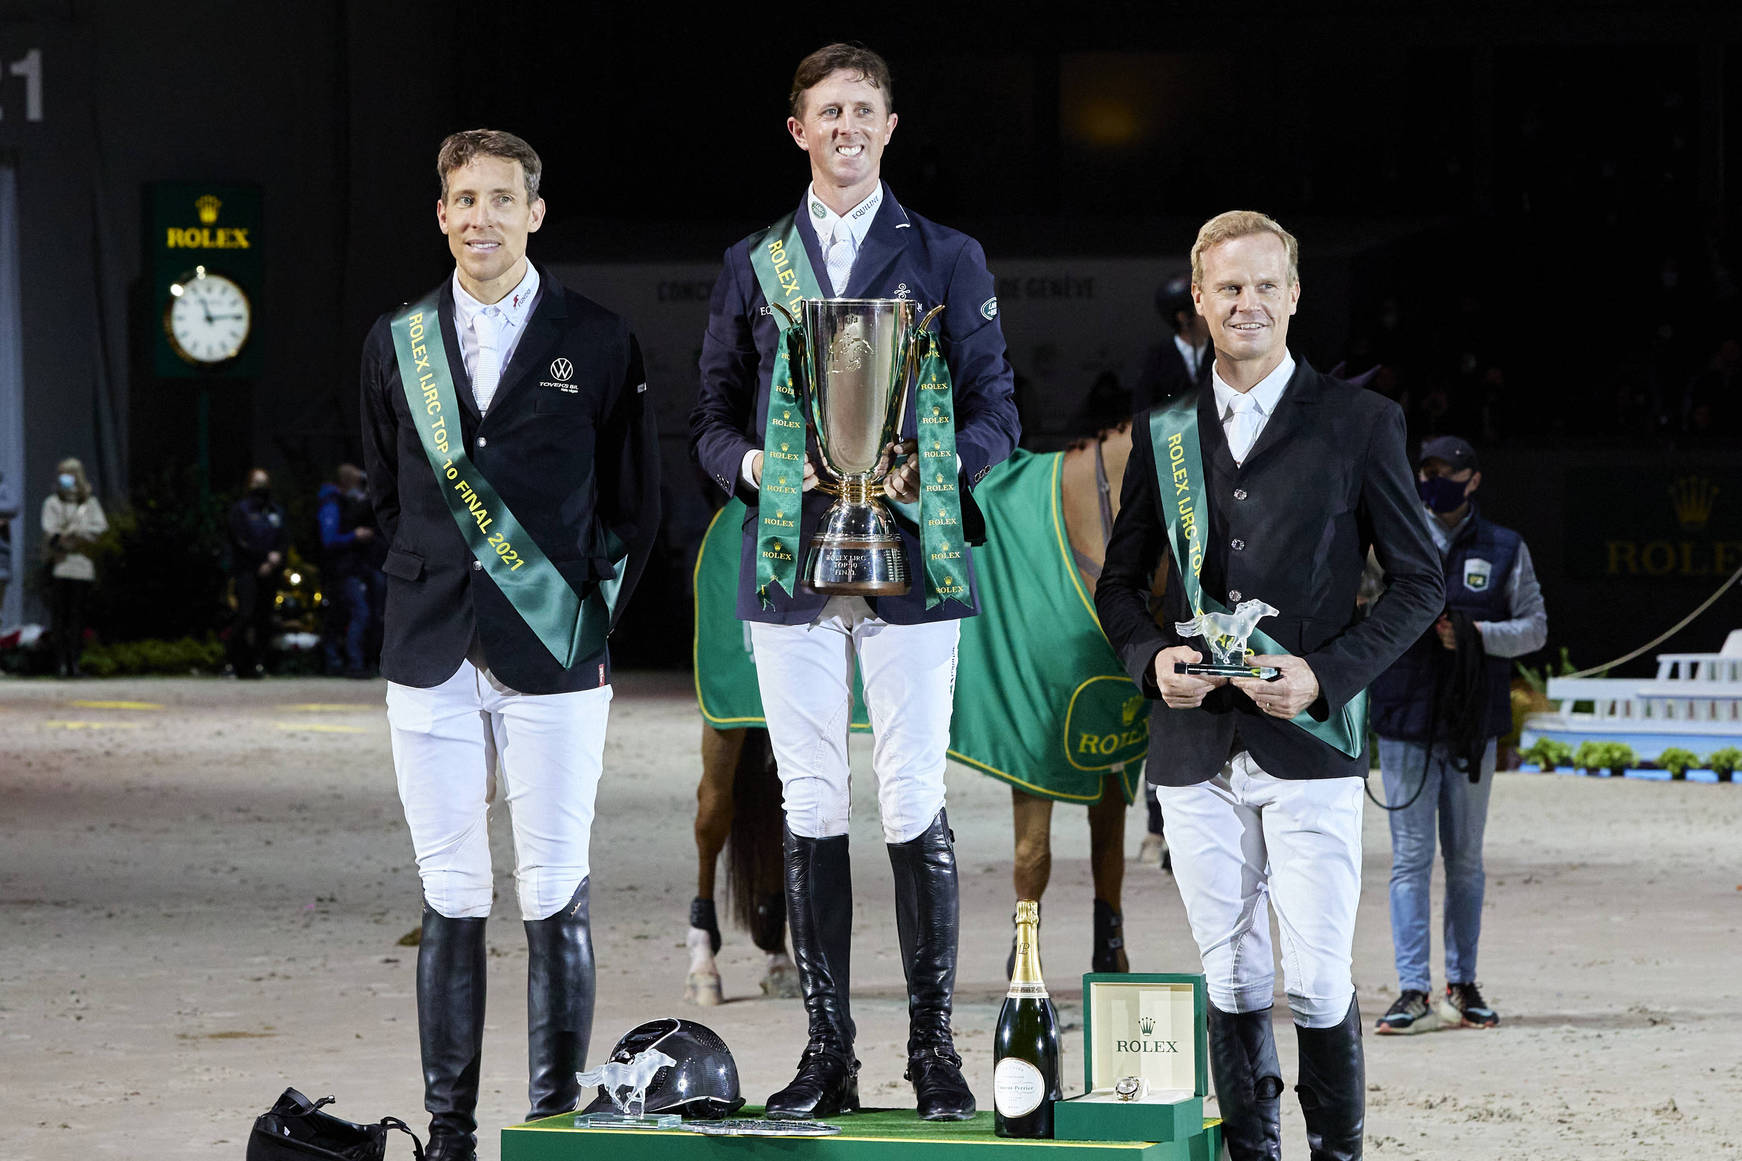 The Rolex IJRC top 10 Final - the unique and prestigious competition created by the International Jumping Riders Club